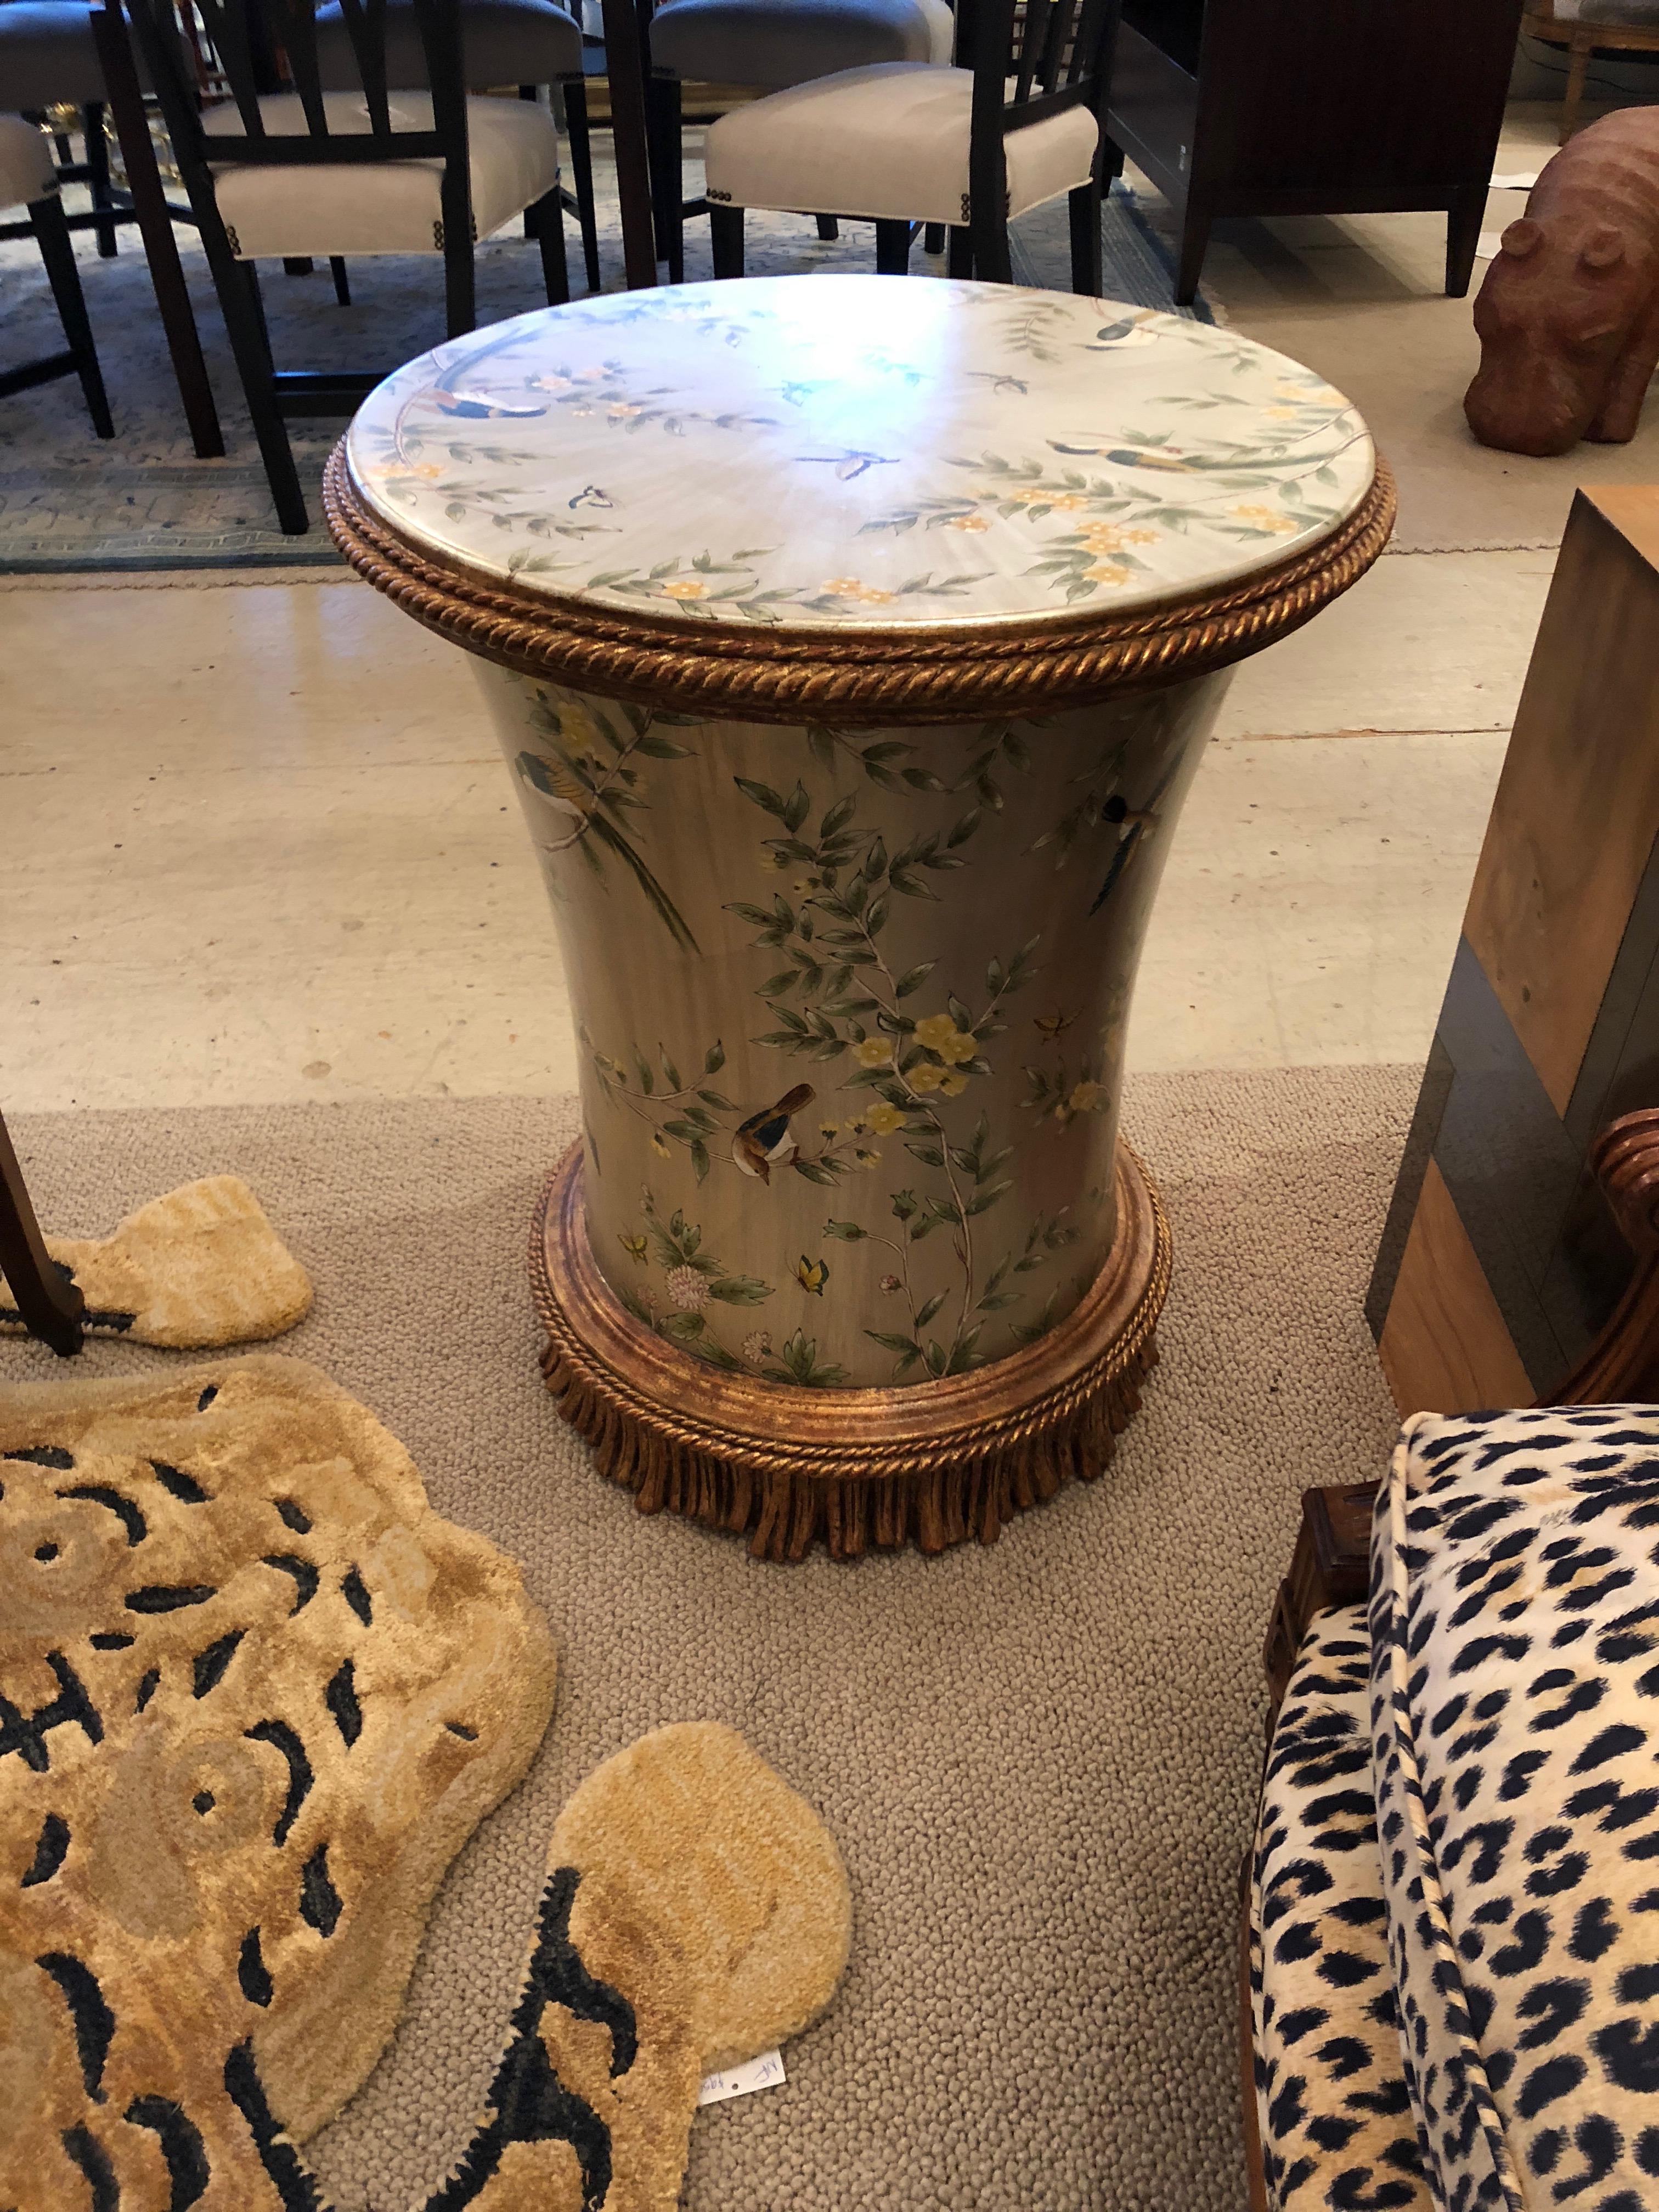 Glamorous circular side or end table having silver leaf background and wonderful motife of birds, flowers and butterflies, reminiscent of Gracie wallpaper. Fabulous bronze gold colored decorative carved wood fringe on the bottom and border around